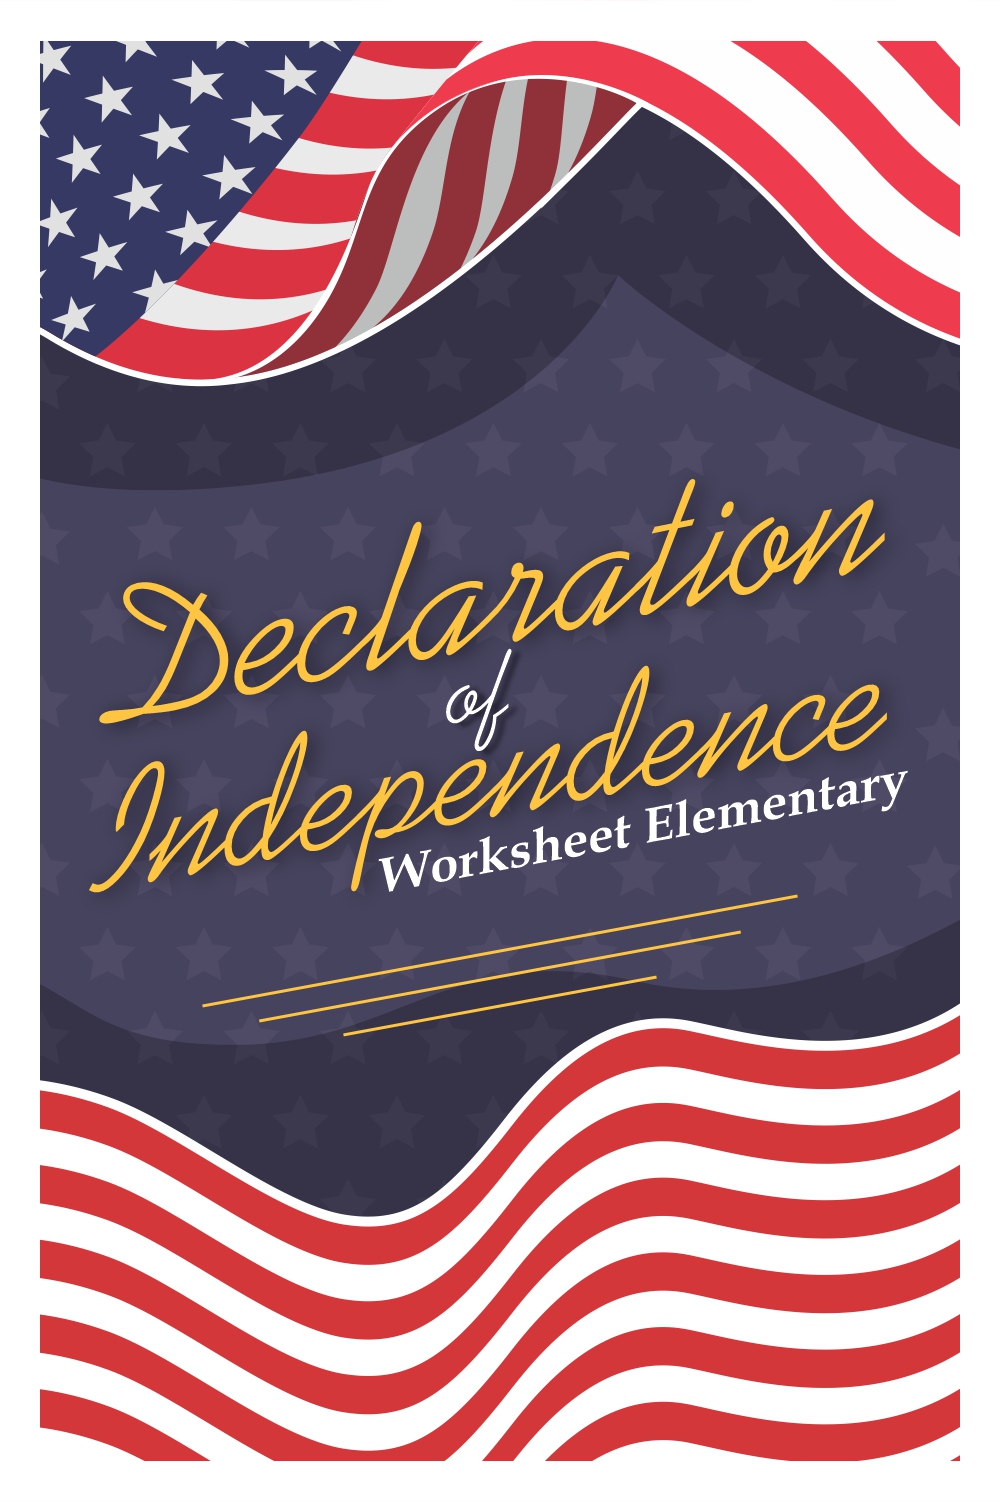 16 Images of Declaration Of Independence Worksheets Elementary